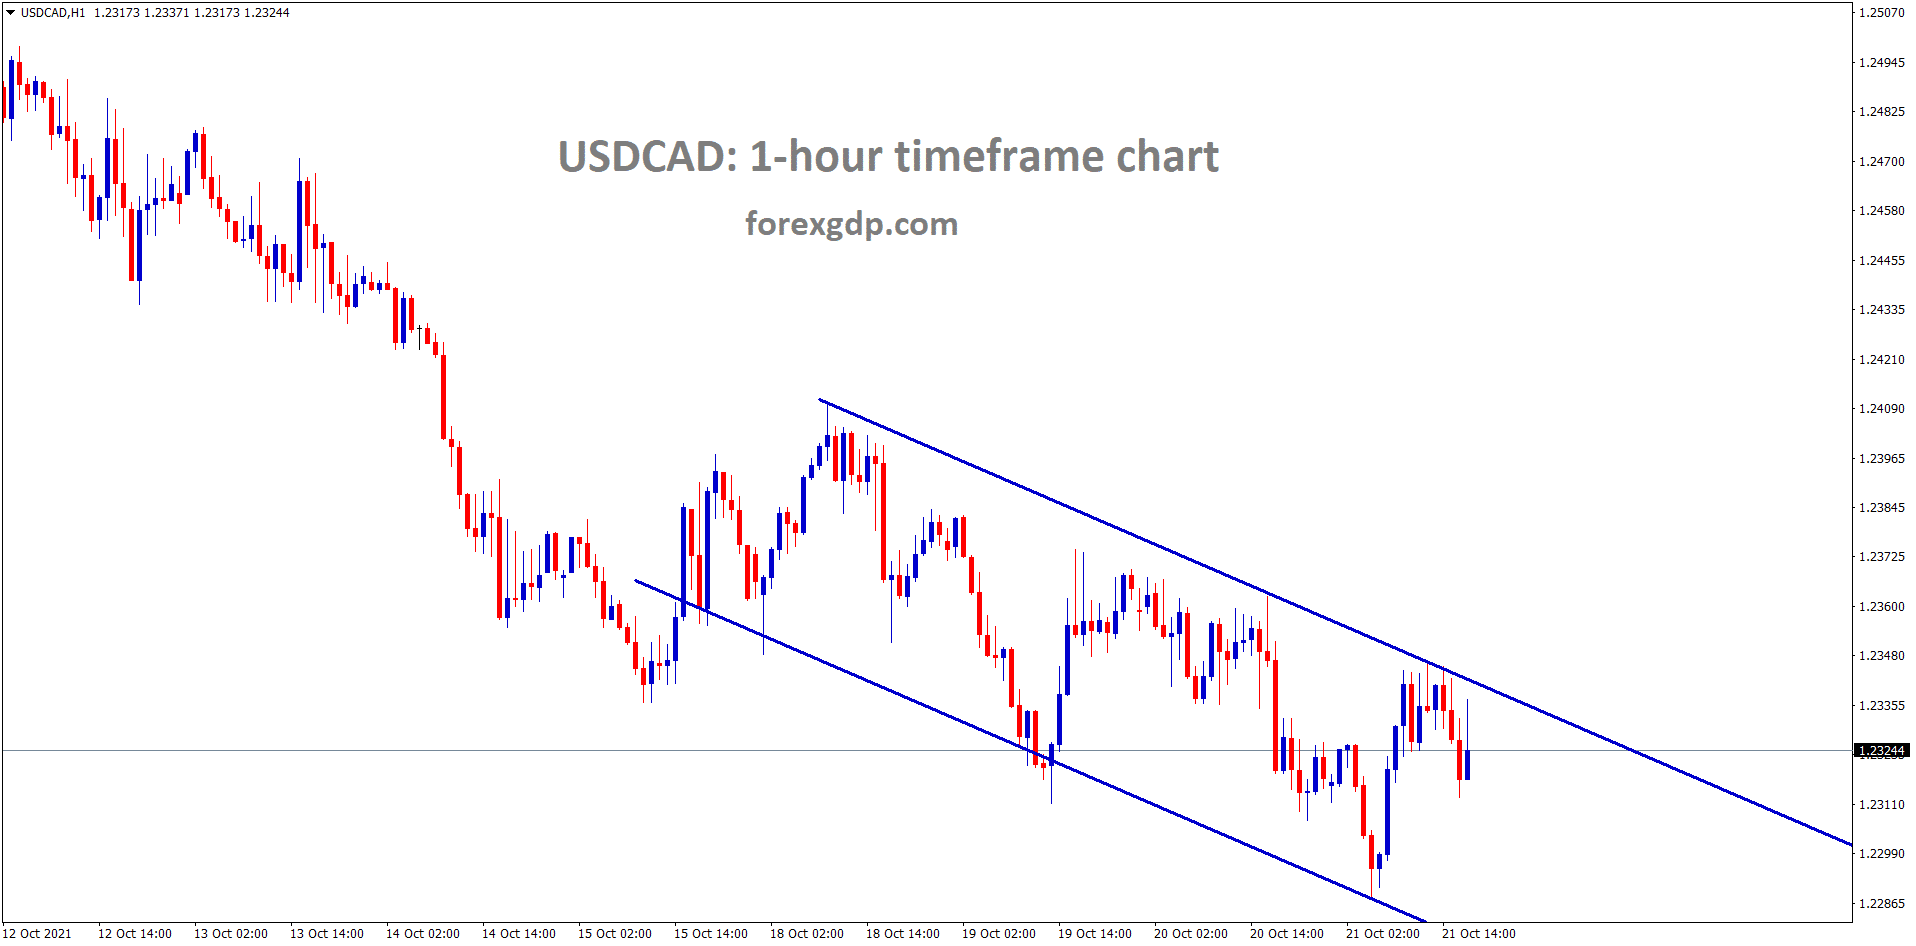 USDCAD is moving in a descending channel range